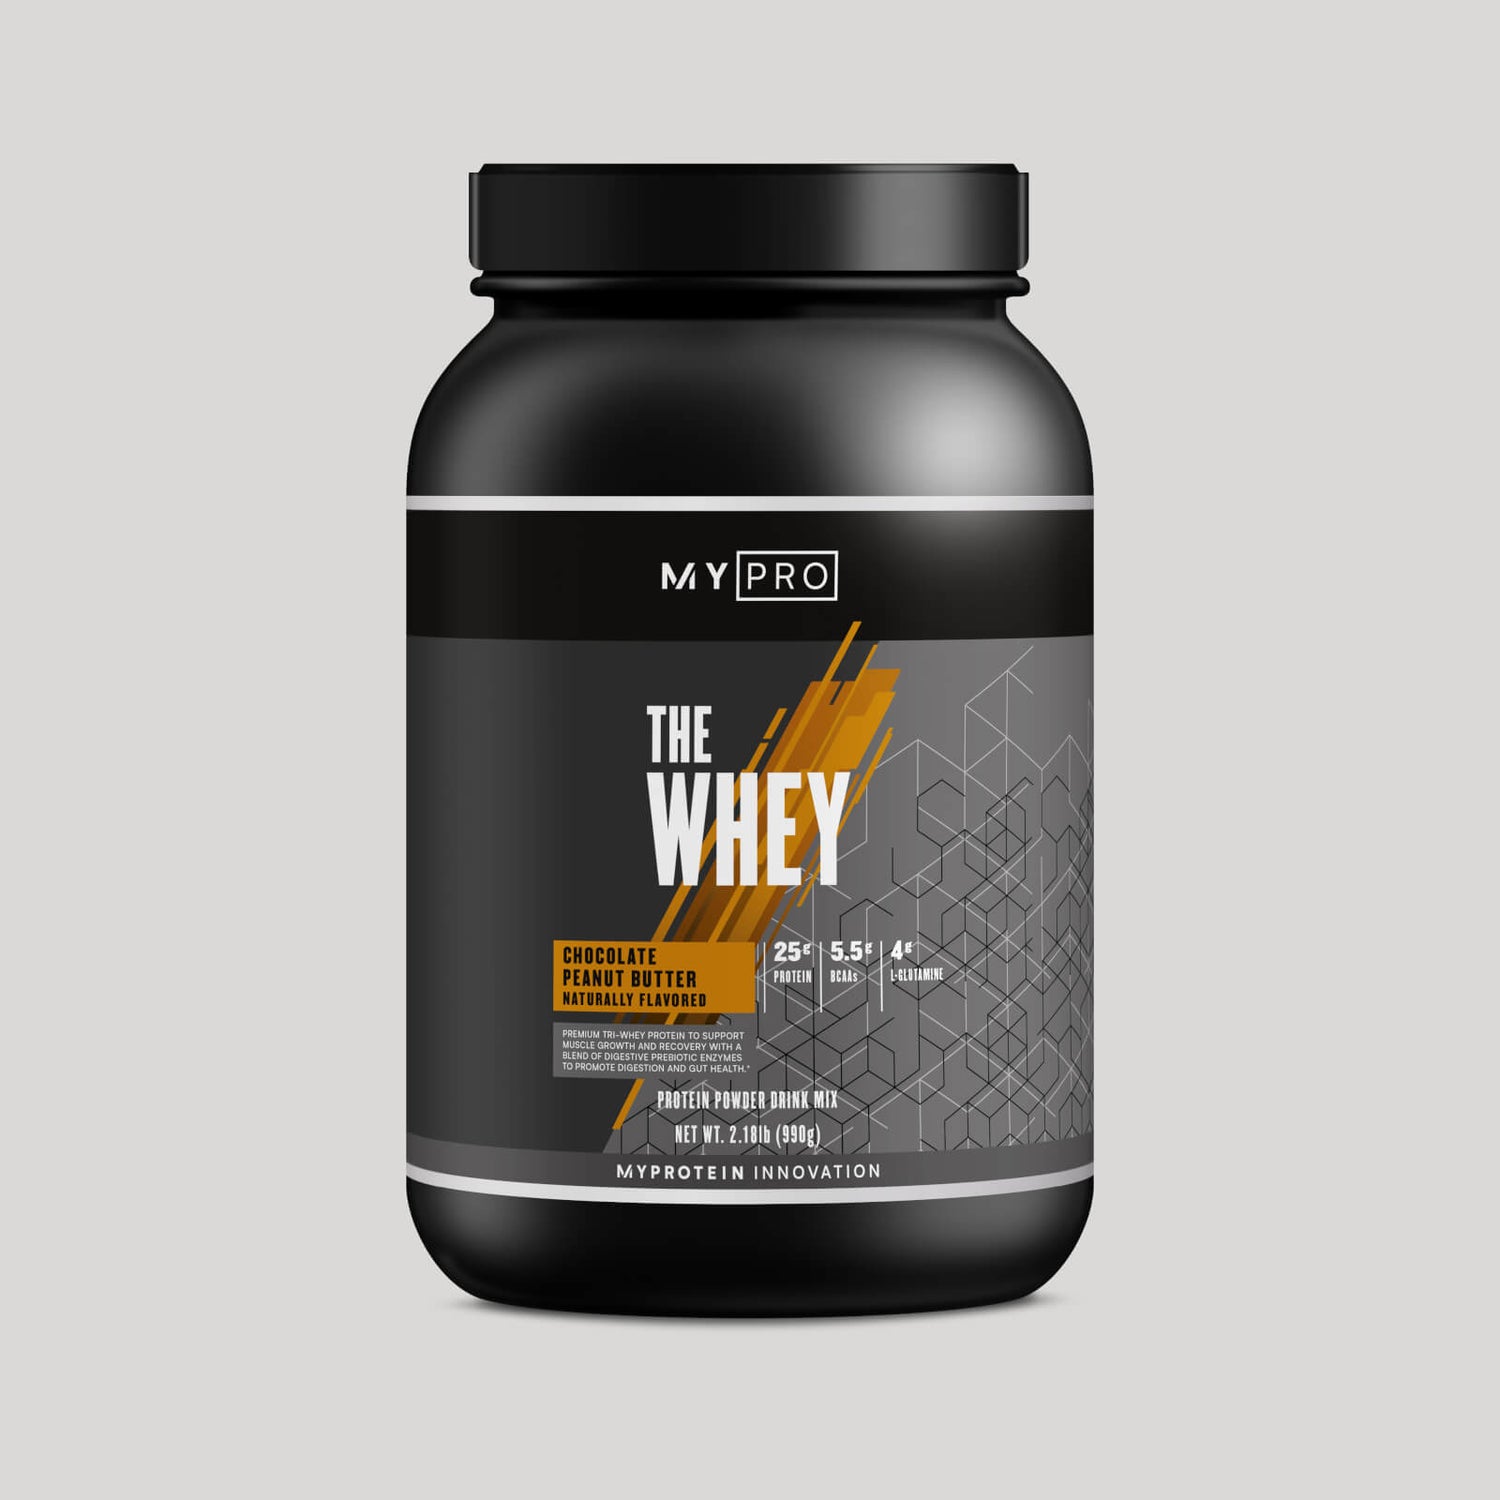 THE Whey (NSF) - 2.3lb - Chocolate Peanut Butter